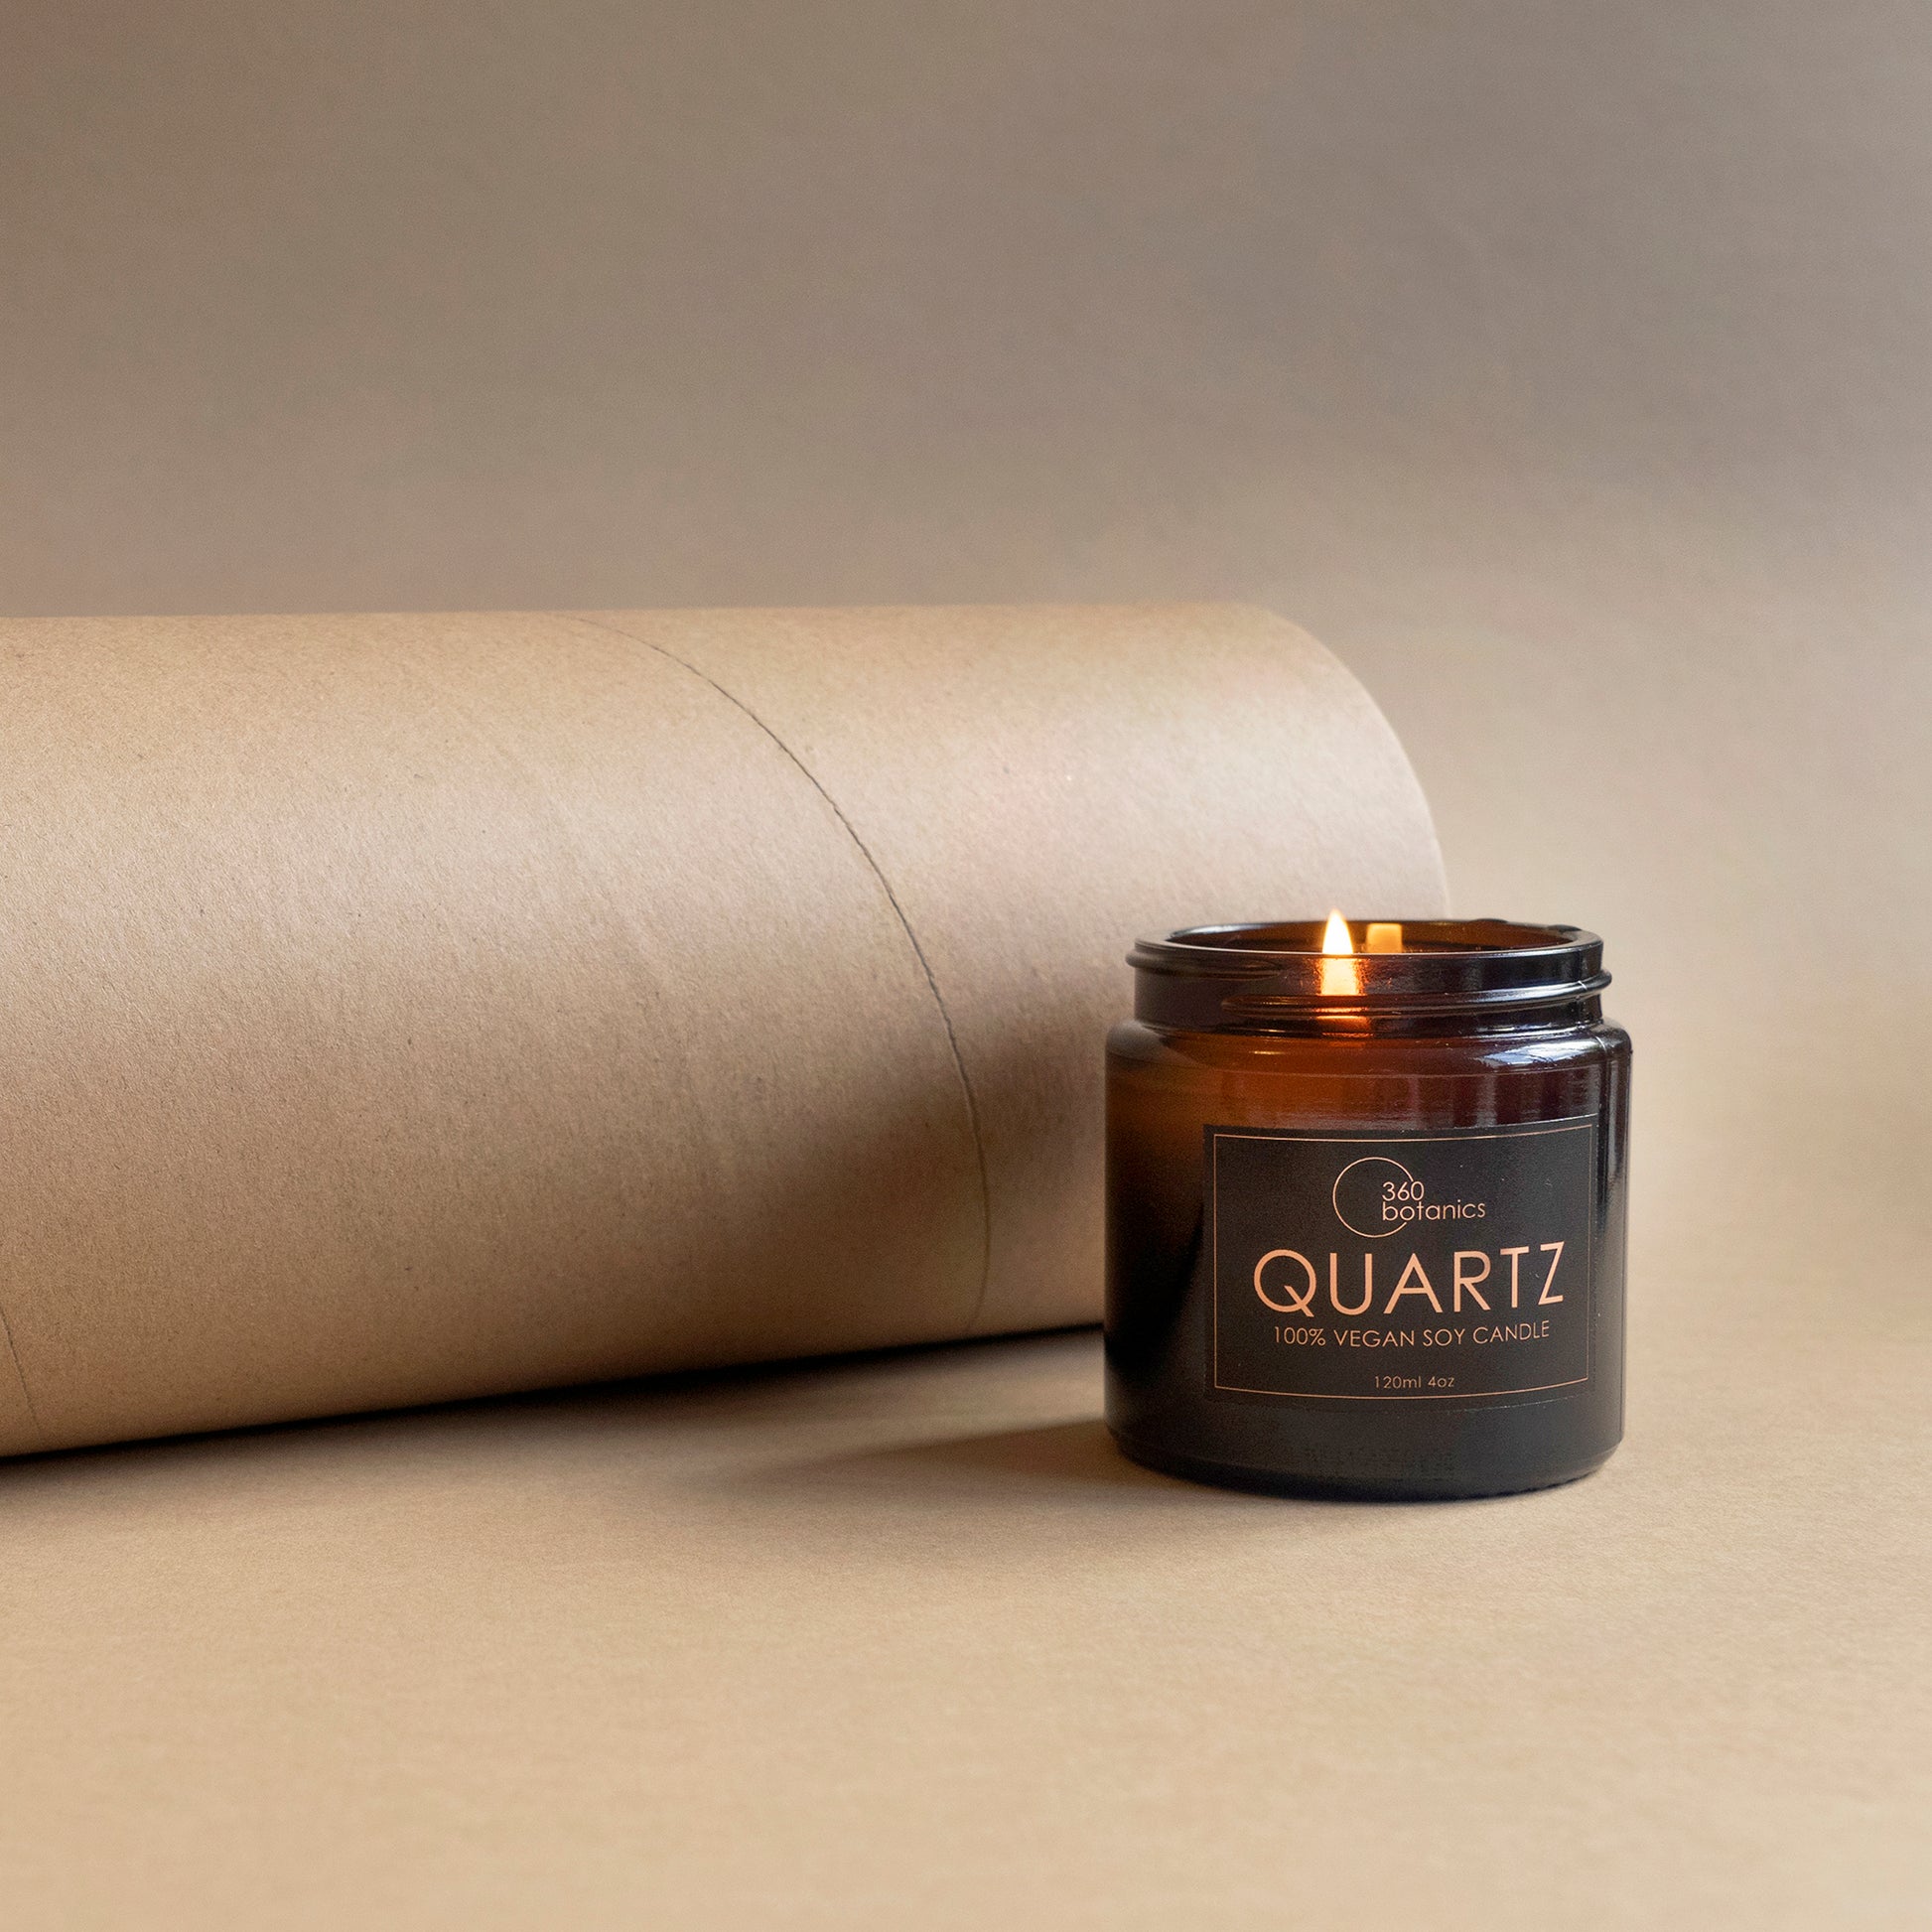  A lit soy candle in a brown glass jar is displayed against a craft paper backdrop that rolls off to one side. The candle's label reads "360 Botanics QUARTZ 100% Vegan Soy Candle, 120ml 4oz," illuminated by the soft glow of the flame, adding warmth to the minimalist setting.